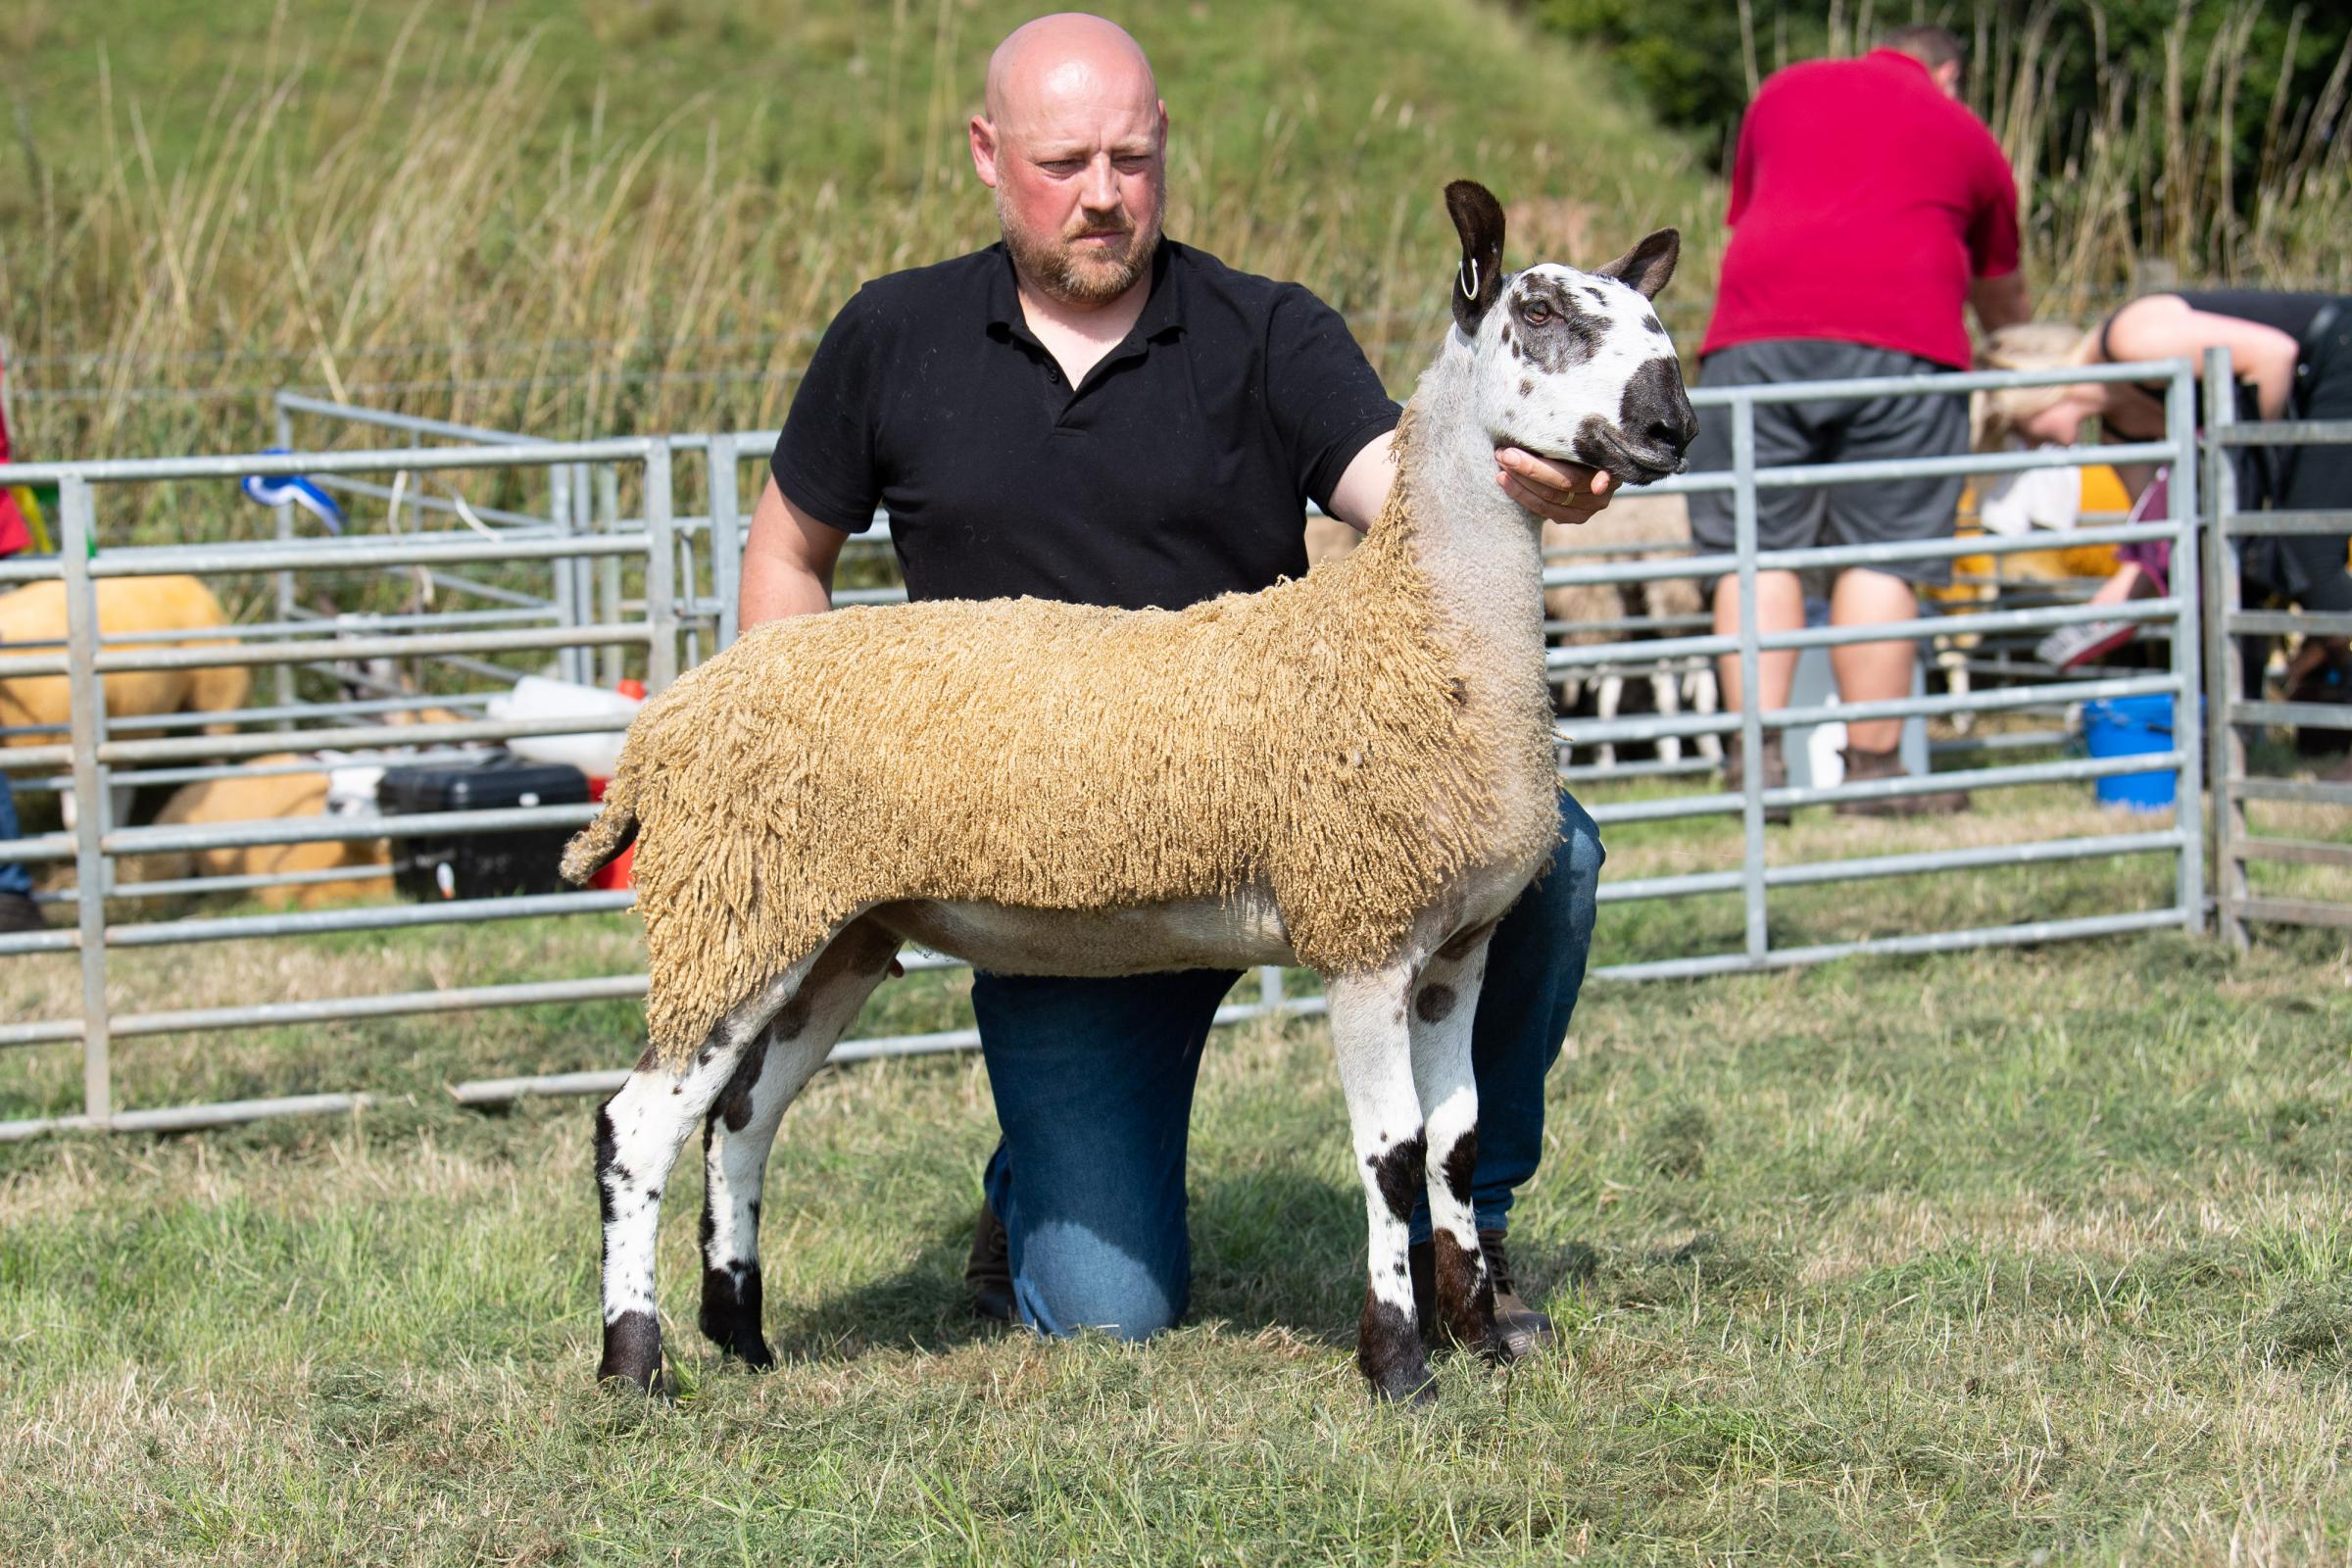 Blue Faced Leicester champion was the ewe lamb from the Kirkpatrick family Ref:RH280821042 Rob Haining / The Scottish Farmer...